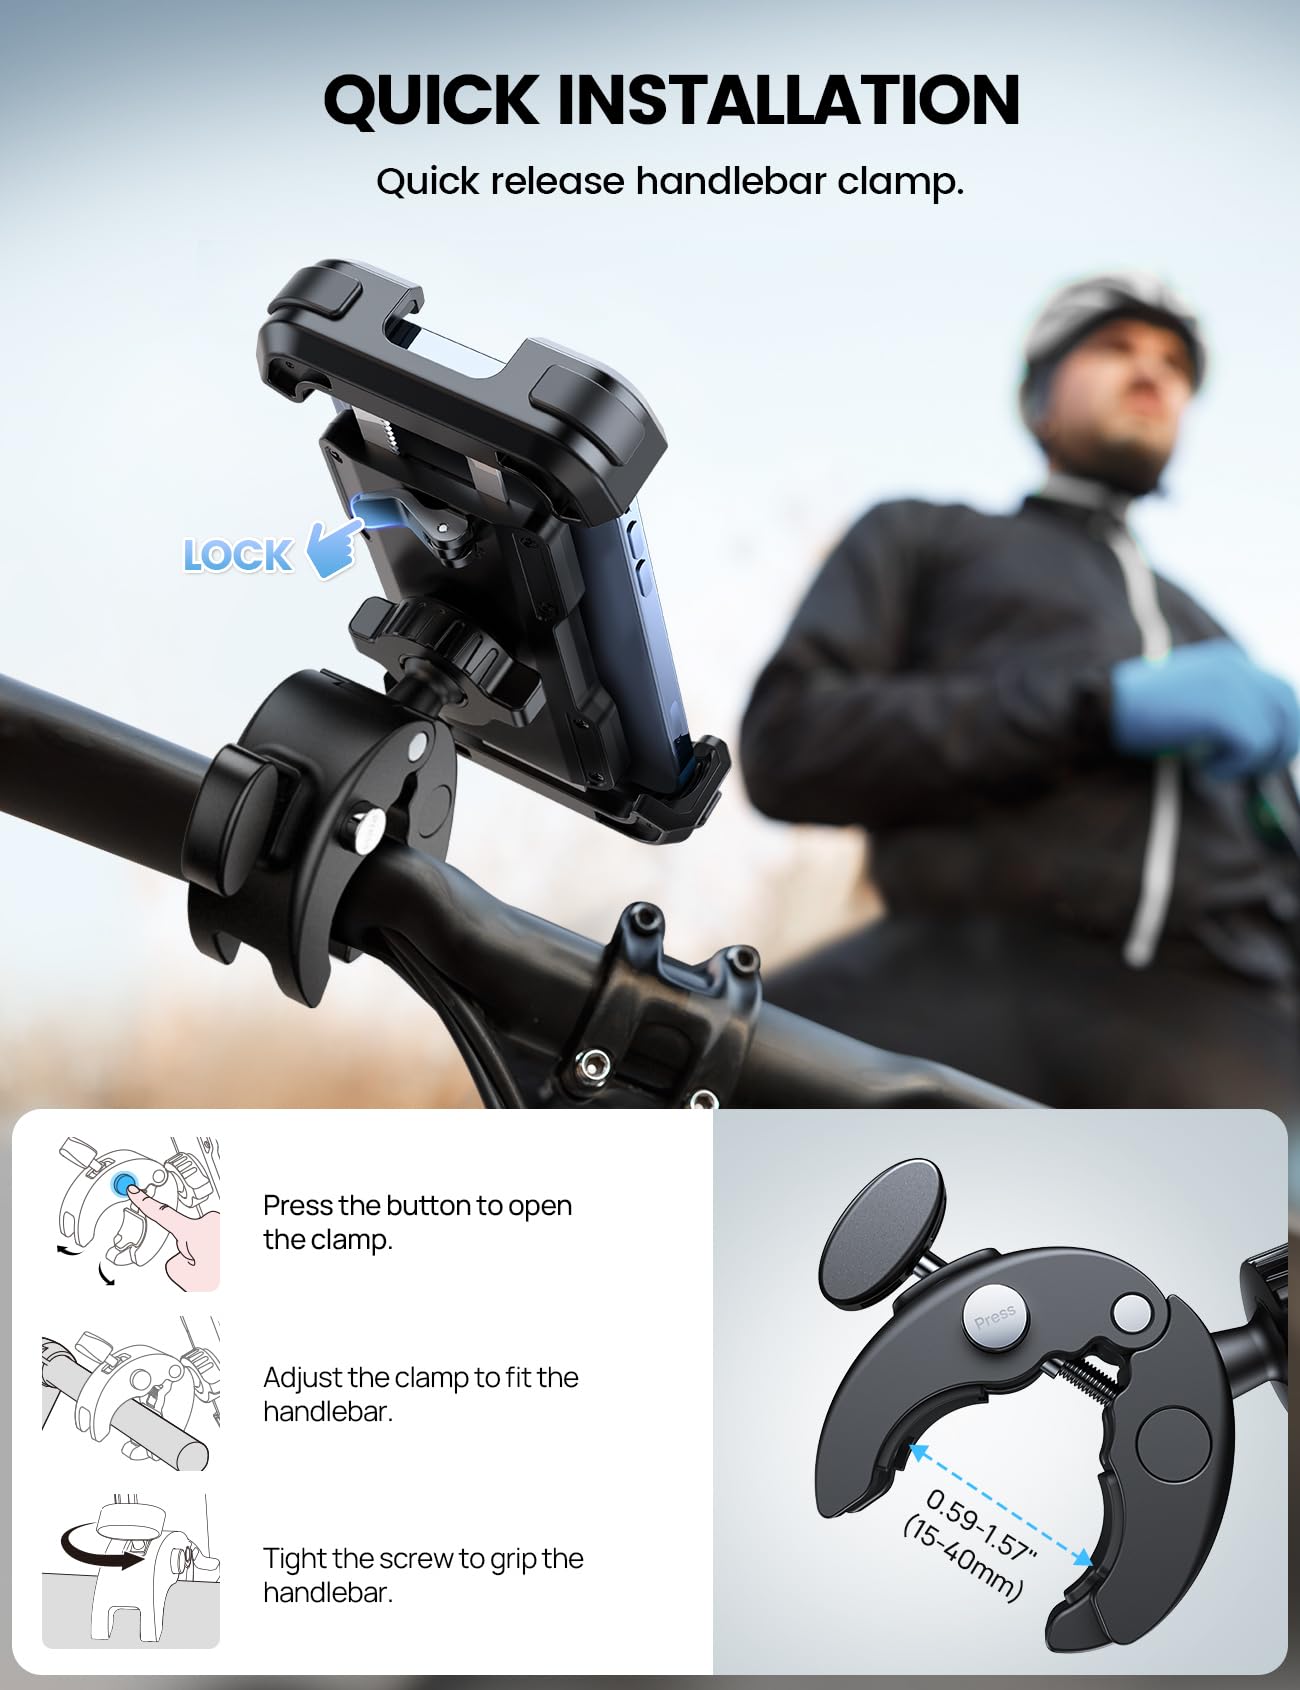 Lamicall Motorcycle Phone Mount, Bike Phone Holder - Upgrade Quick Install Handlebar Clip for Bicycle Scooter, Cell Phone Clamp for iPhone 14 Pro Max / 13/12, Galaxy S10 and More 4.7-6.8